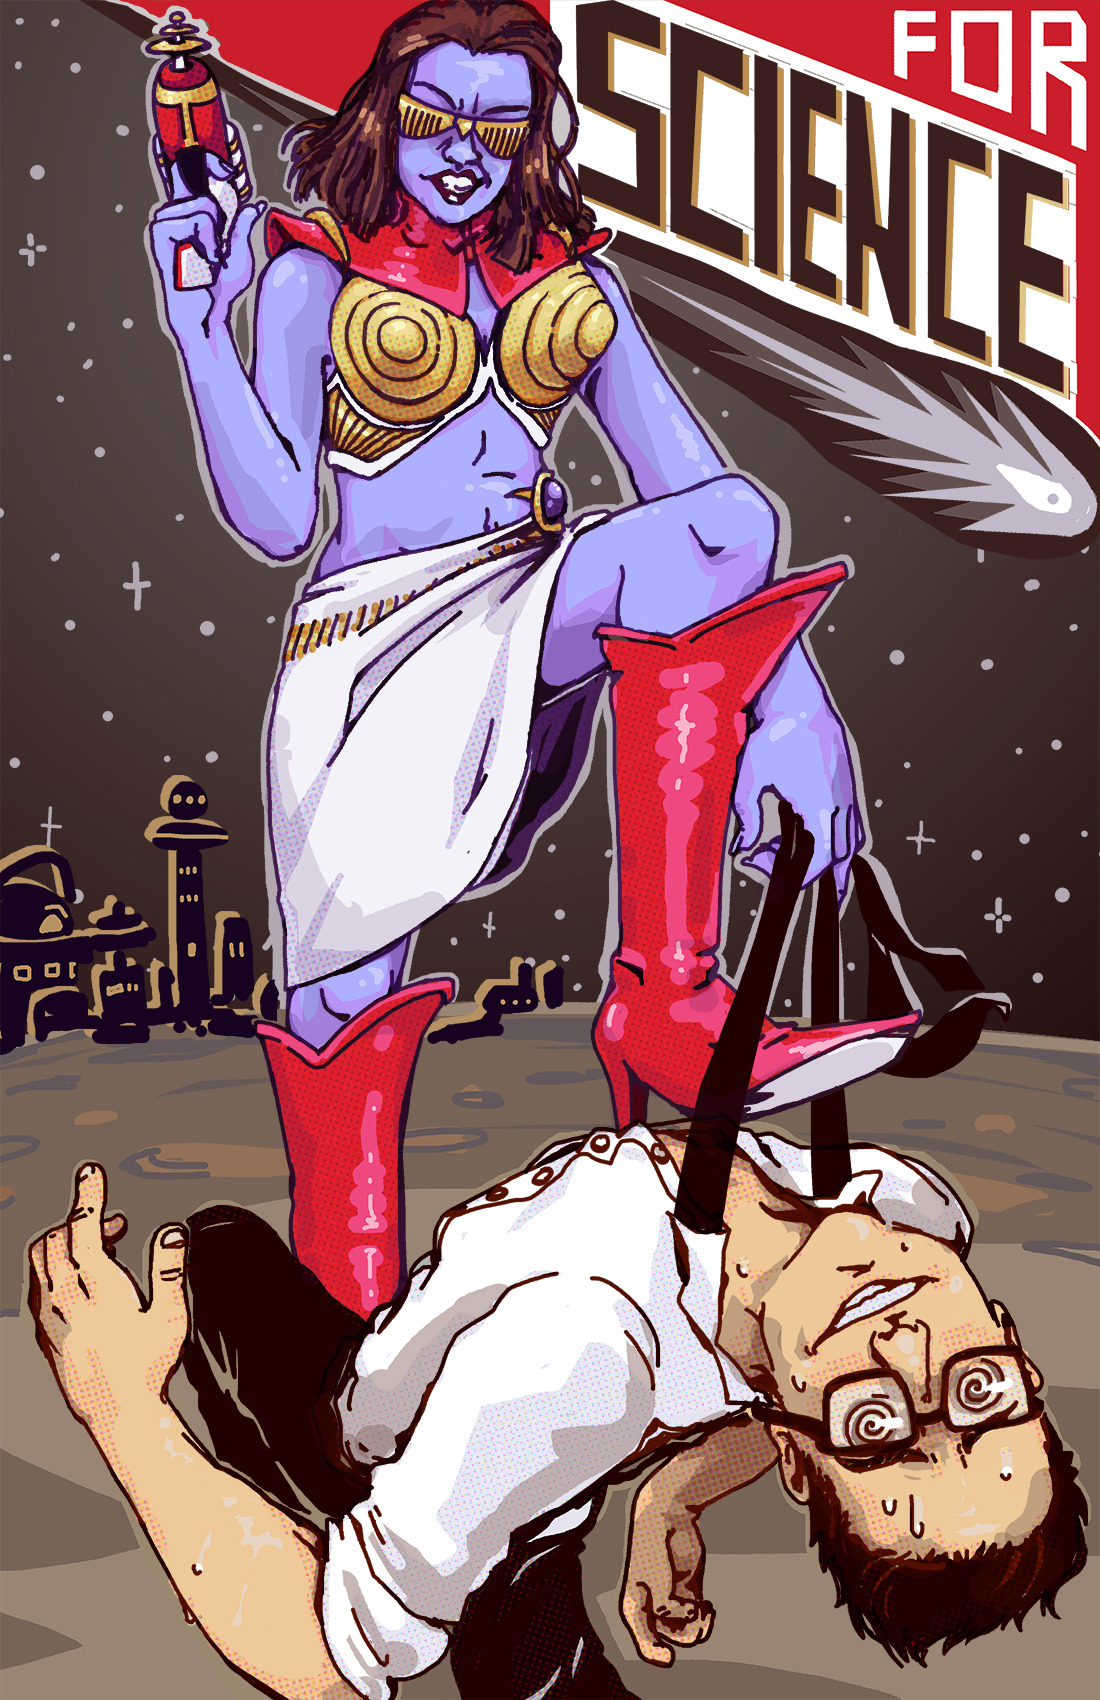 An alien woman with blue skin and a blaster puts her boot on a man's neck. His eyes are spirals and he has a lopsided grin.